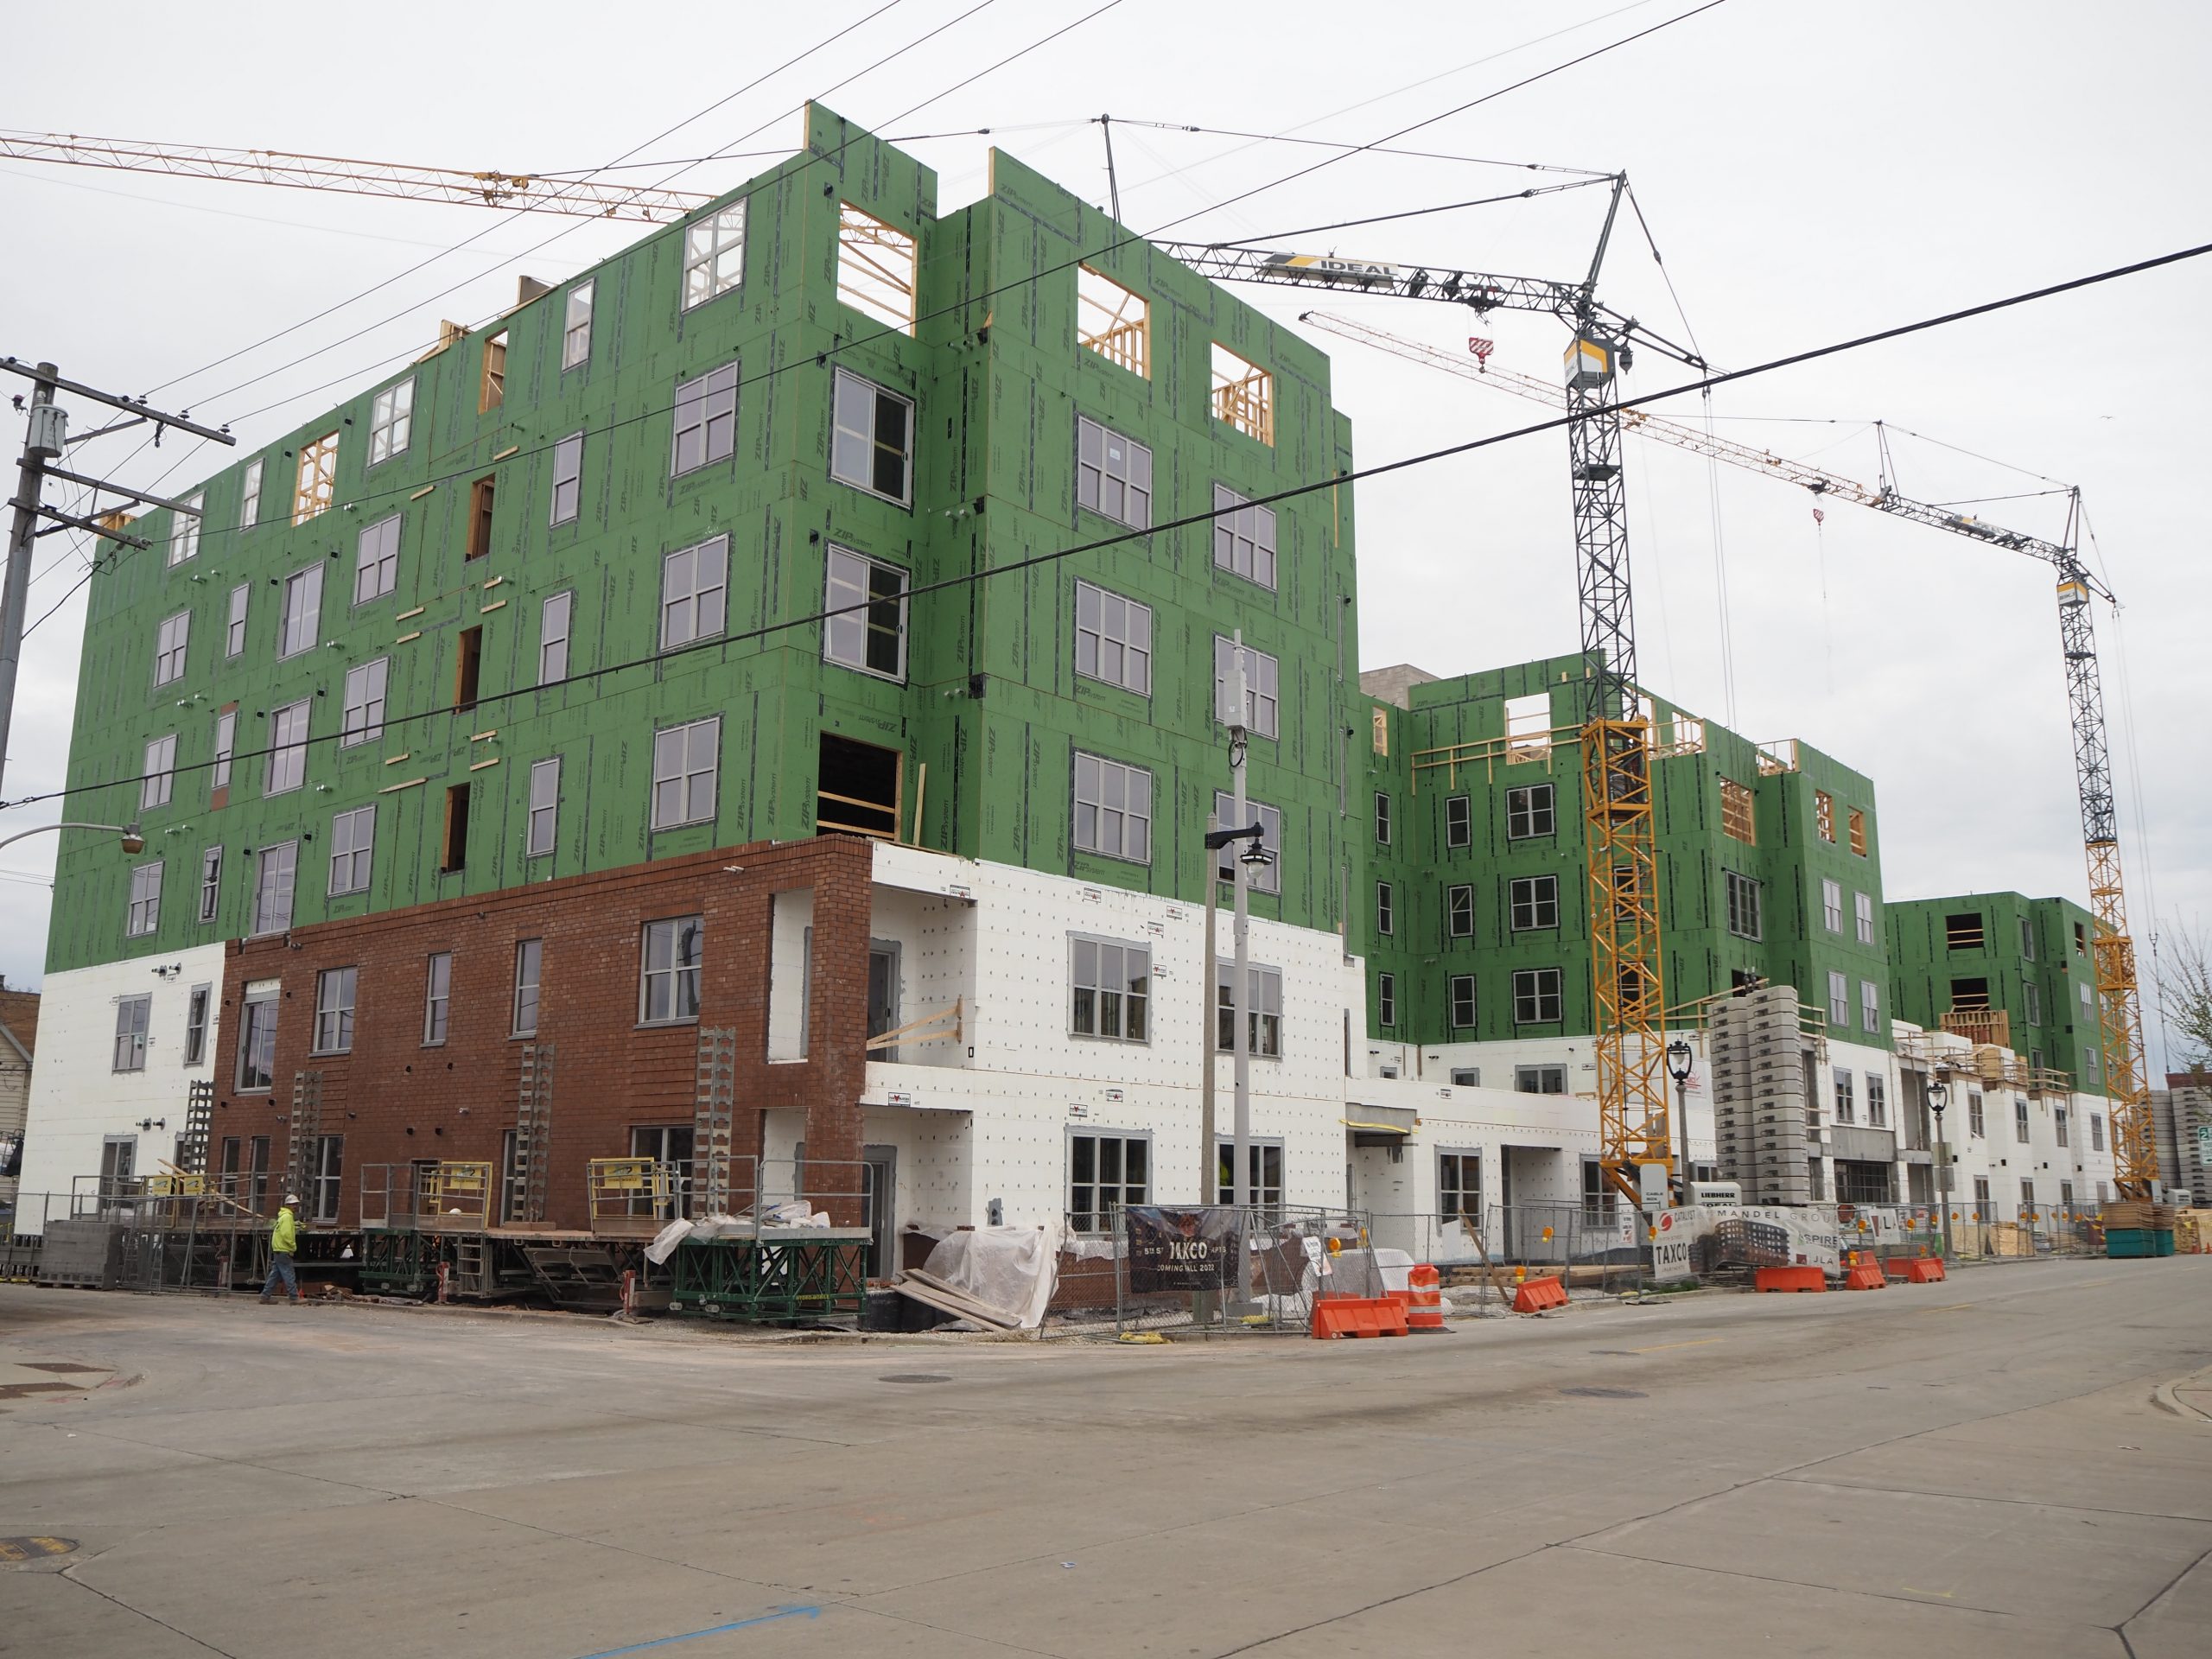 Taxco Apartments under construction on S. 5th St. Photo by Jeramey Jannene.